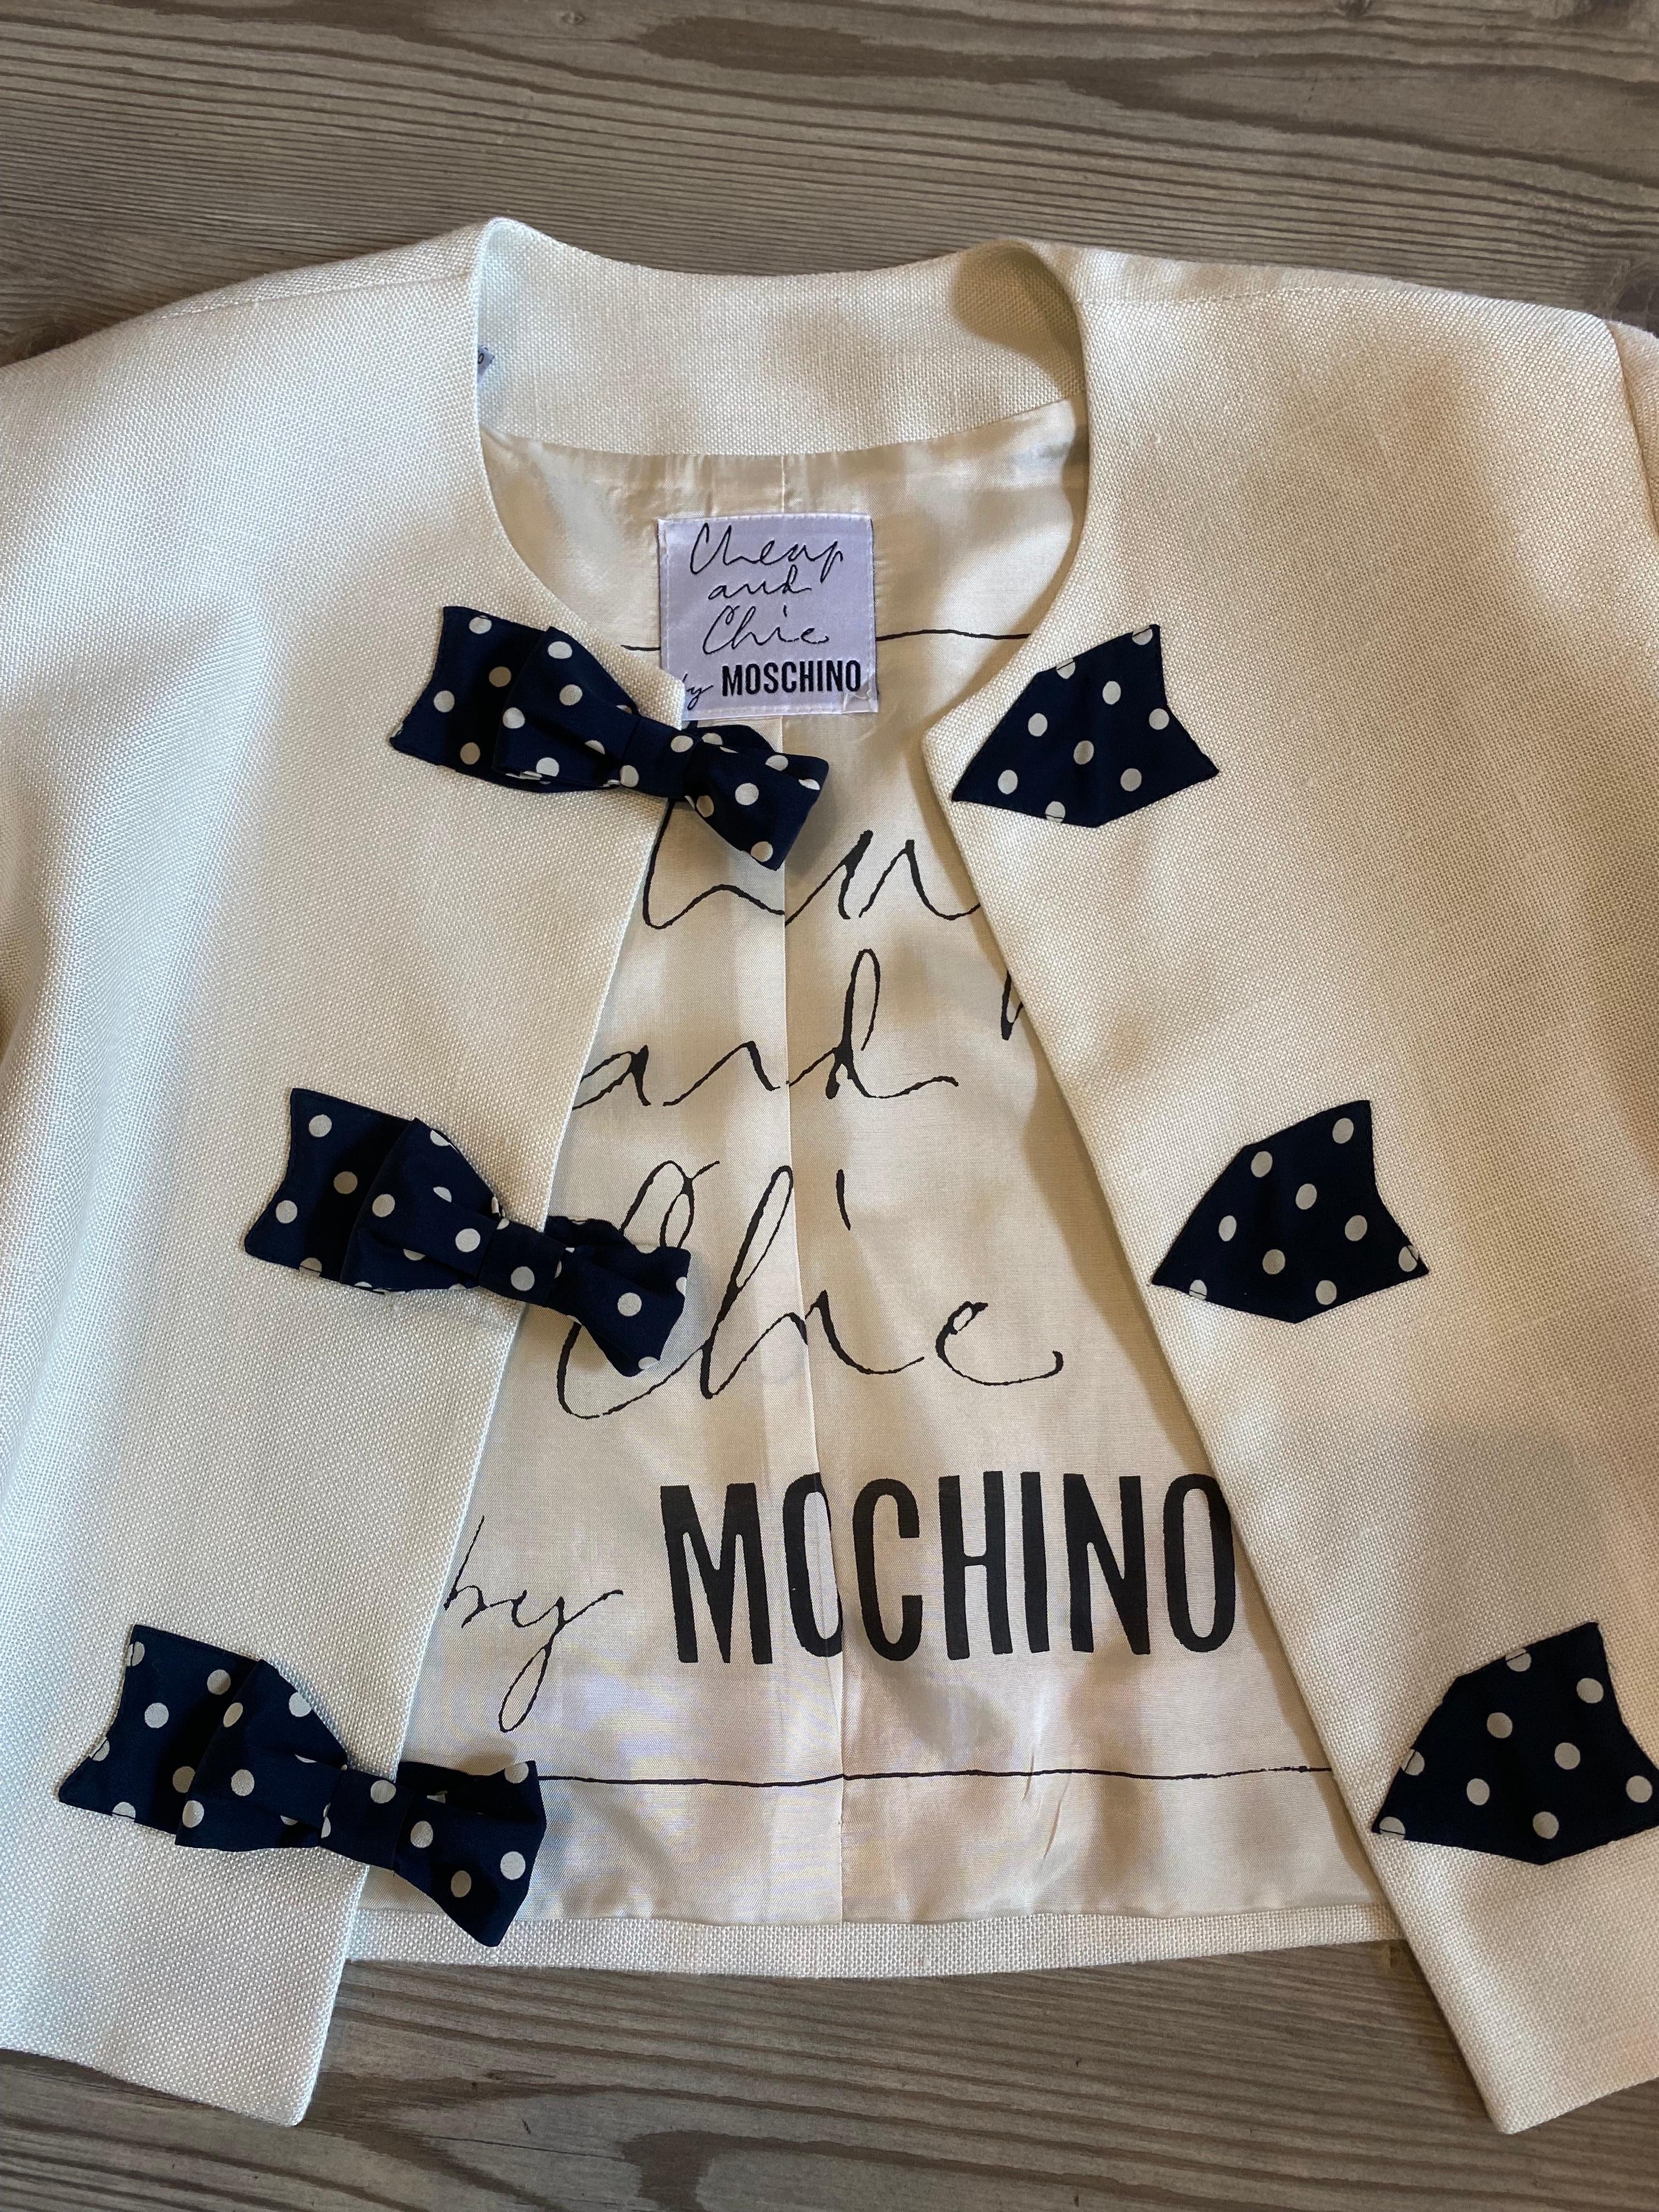 Costume Moschino Cheap and Chic en vente 4